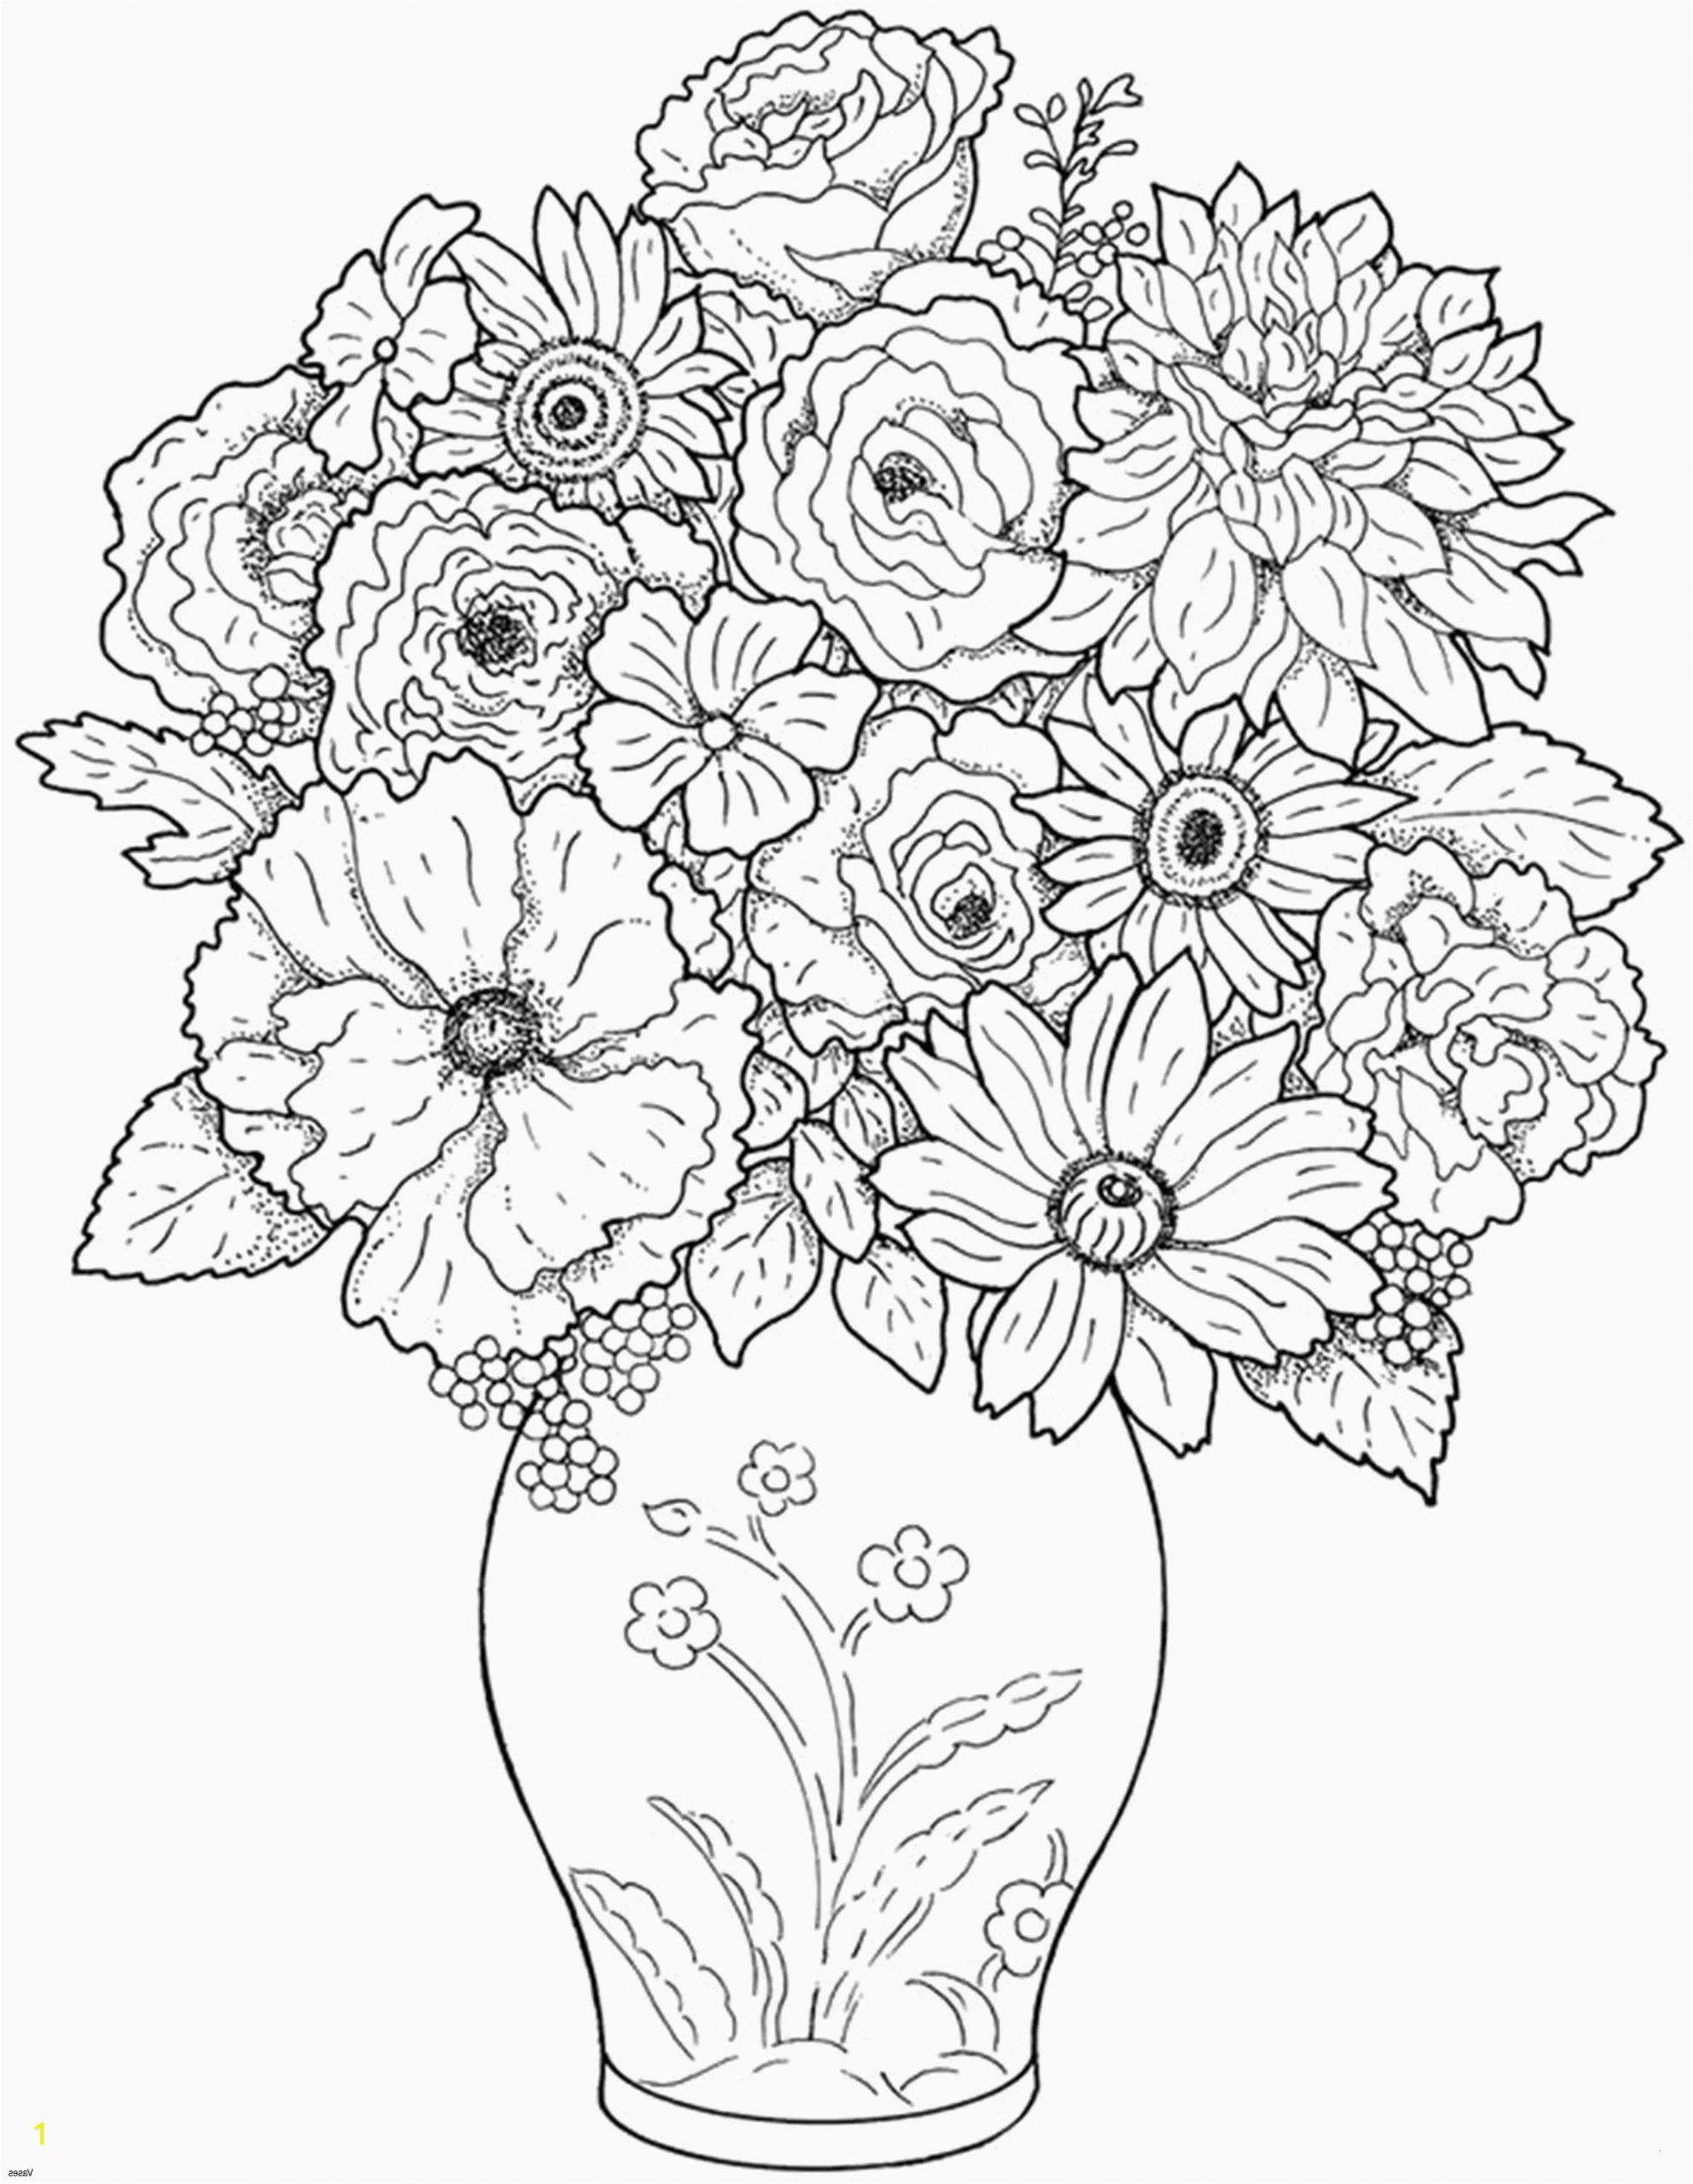 coloring page for january unique photos cactus vase luxury cactus coloring page lovely coloring best of coloring page for january